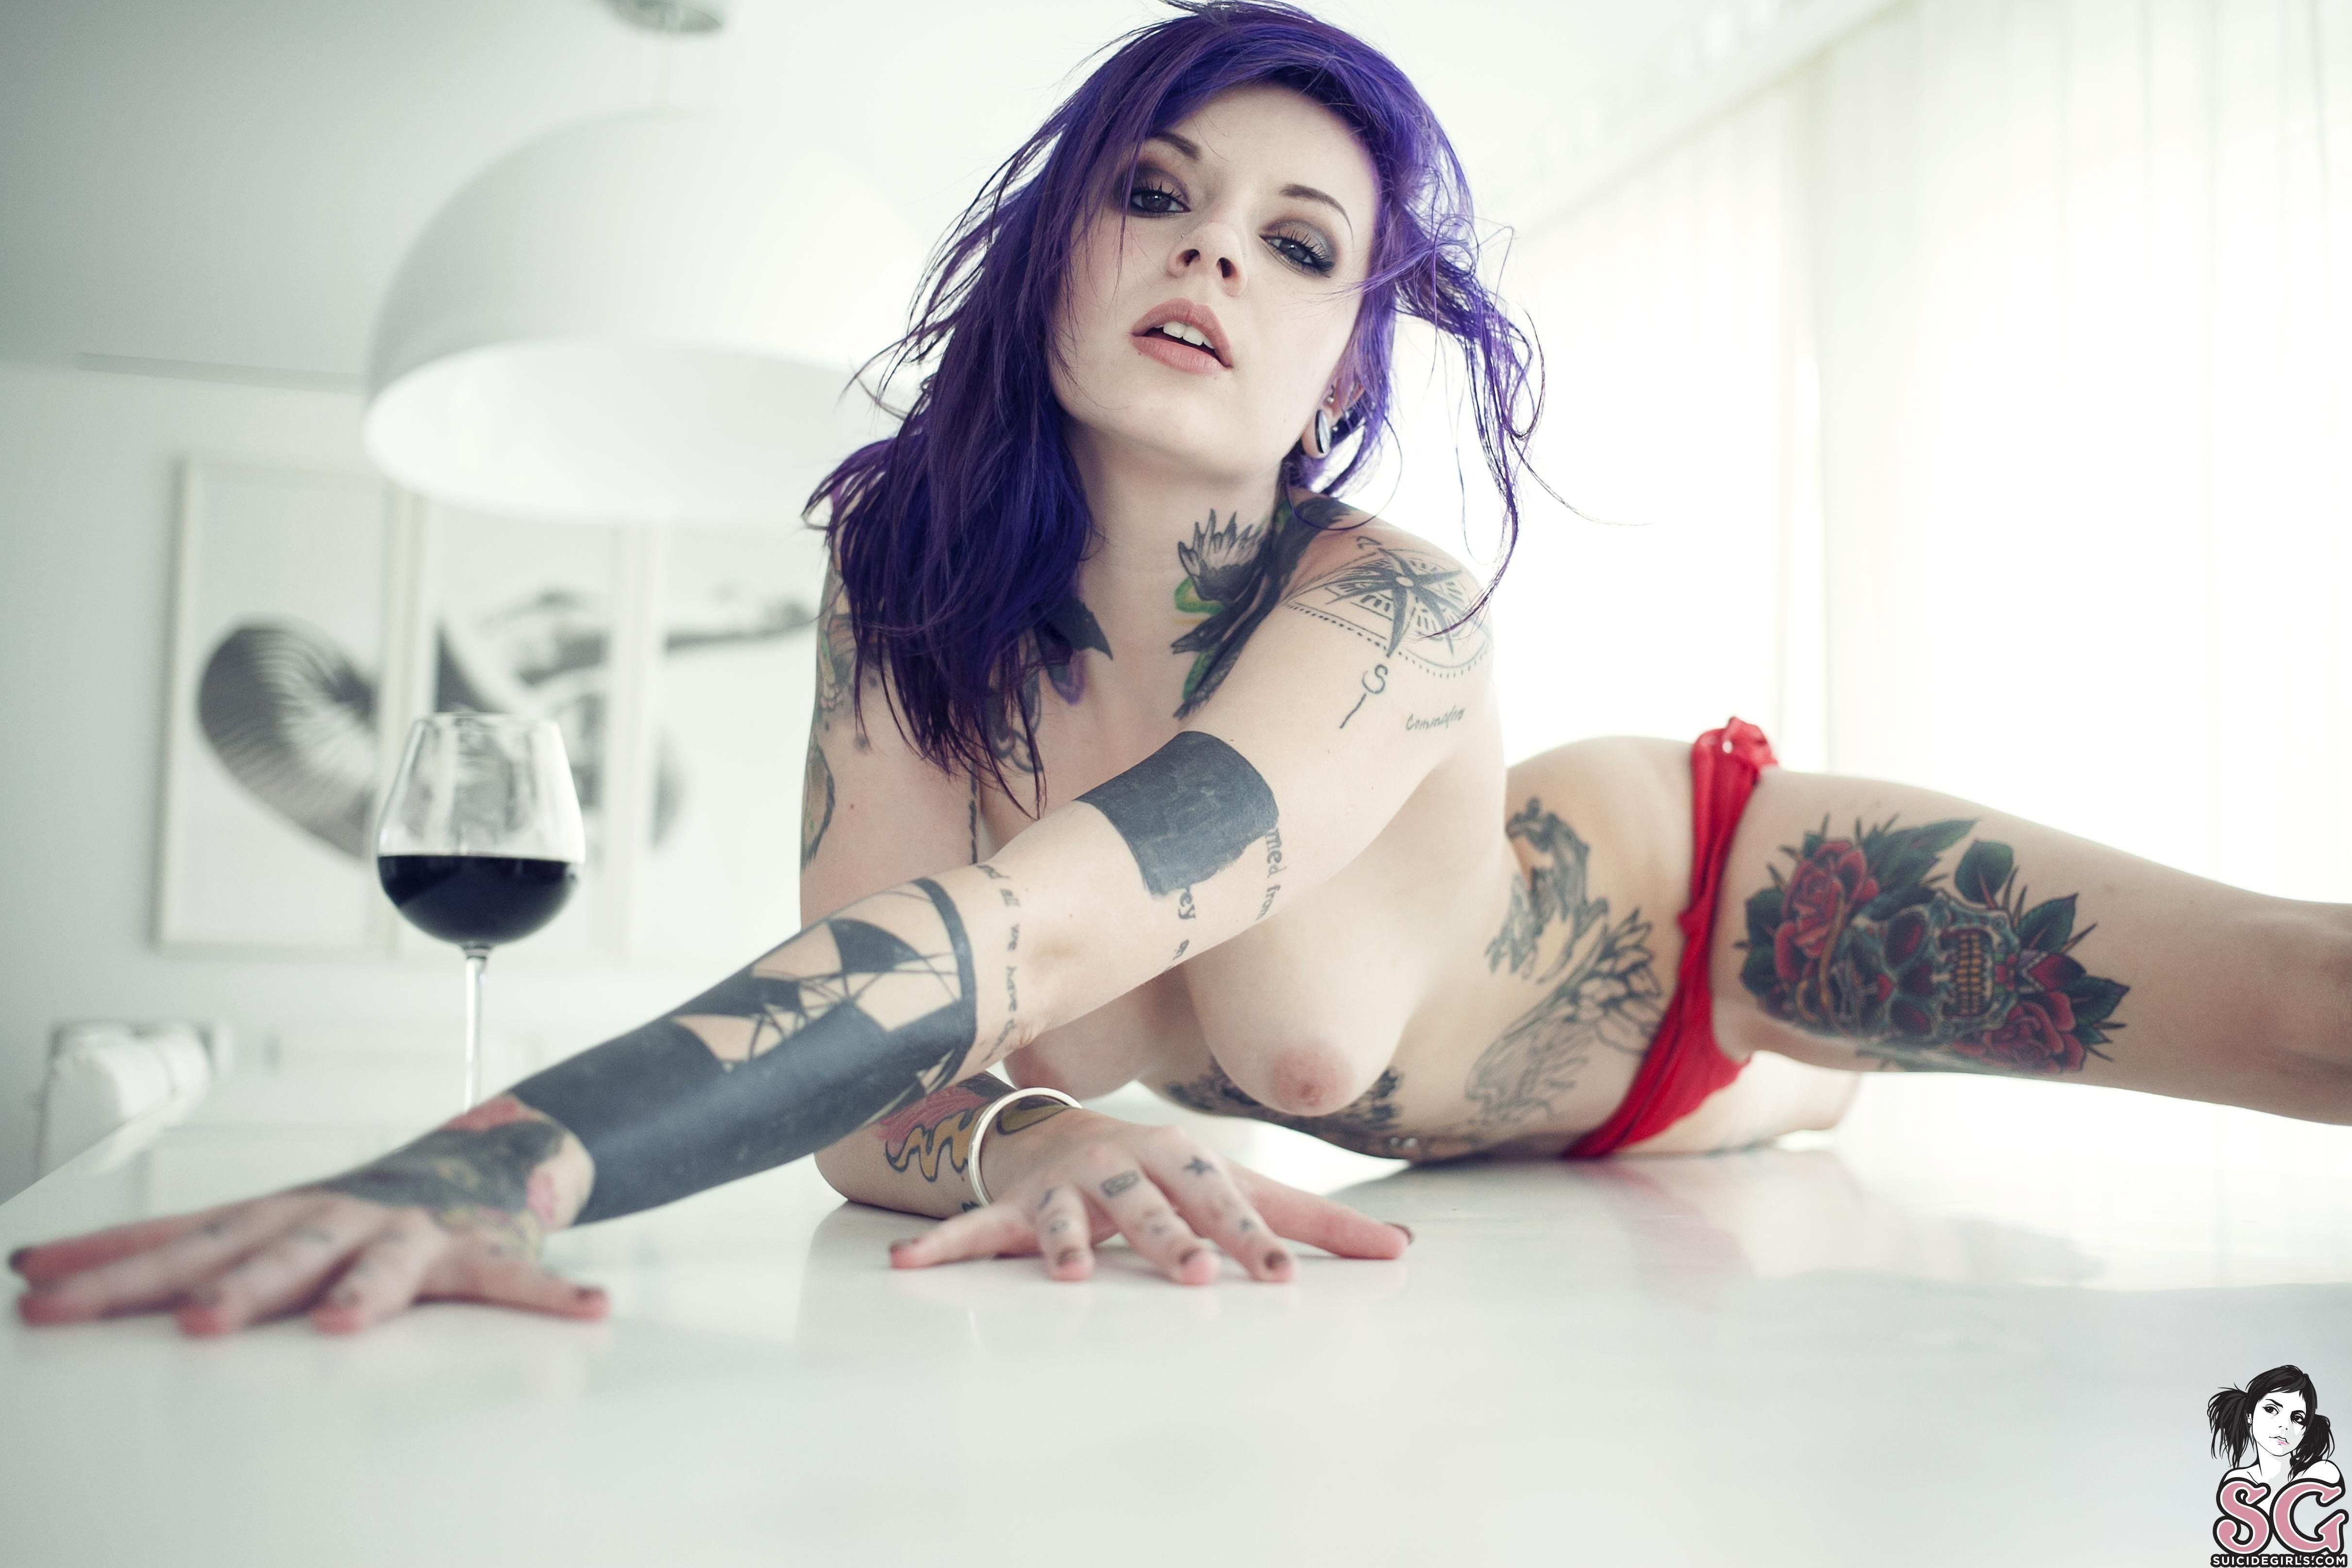 Sexy half naked girls with tattoos